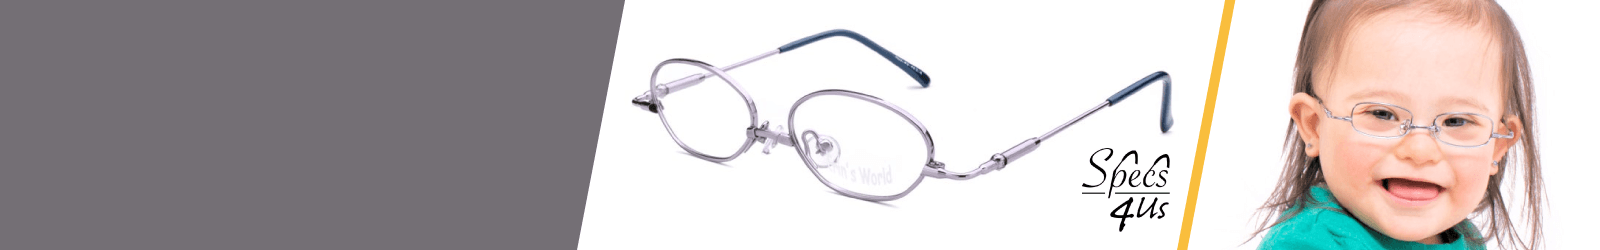 White Specs4us Eyewear for Kids from 6 to 8-year-old